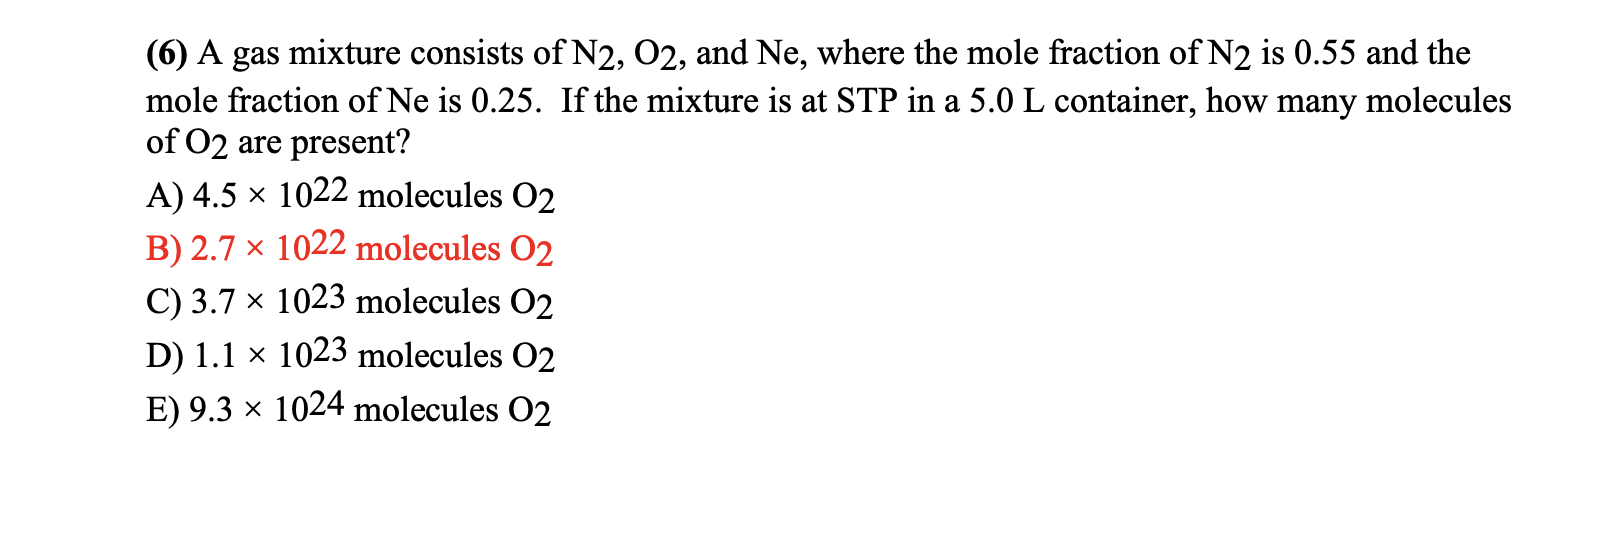 (6) A gas mixture consists of N2, 02, and Ne, where the mole fraction of N2 is 0.55 and the
mole fraction of Ne is 0.25. If the mixture is at STP in a 5.0 L container, how many molecules
of 02 are present?
A) 4.5 x 1022 molecules 02
B) 2.7 × 1022 molecules O2
C) 3.7 × 1023 molecules O2
D) 1.1 × 1023 molecules O2
E) 9.3 × 1024 molecules 02
